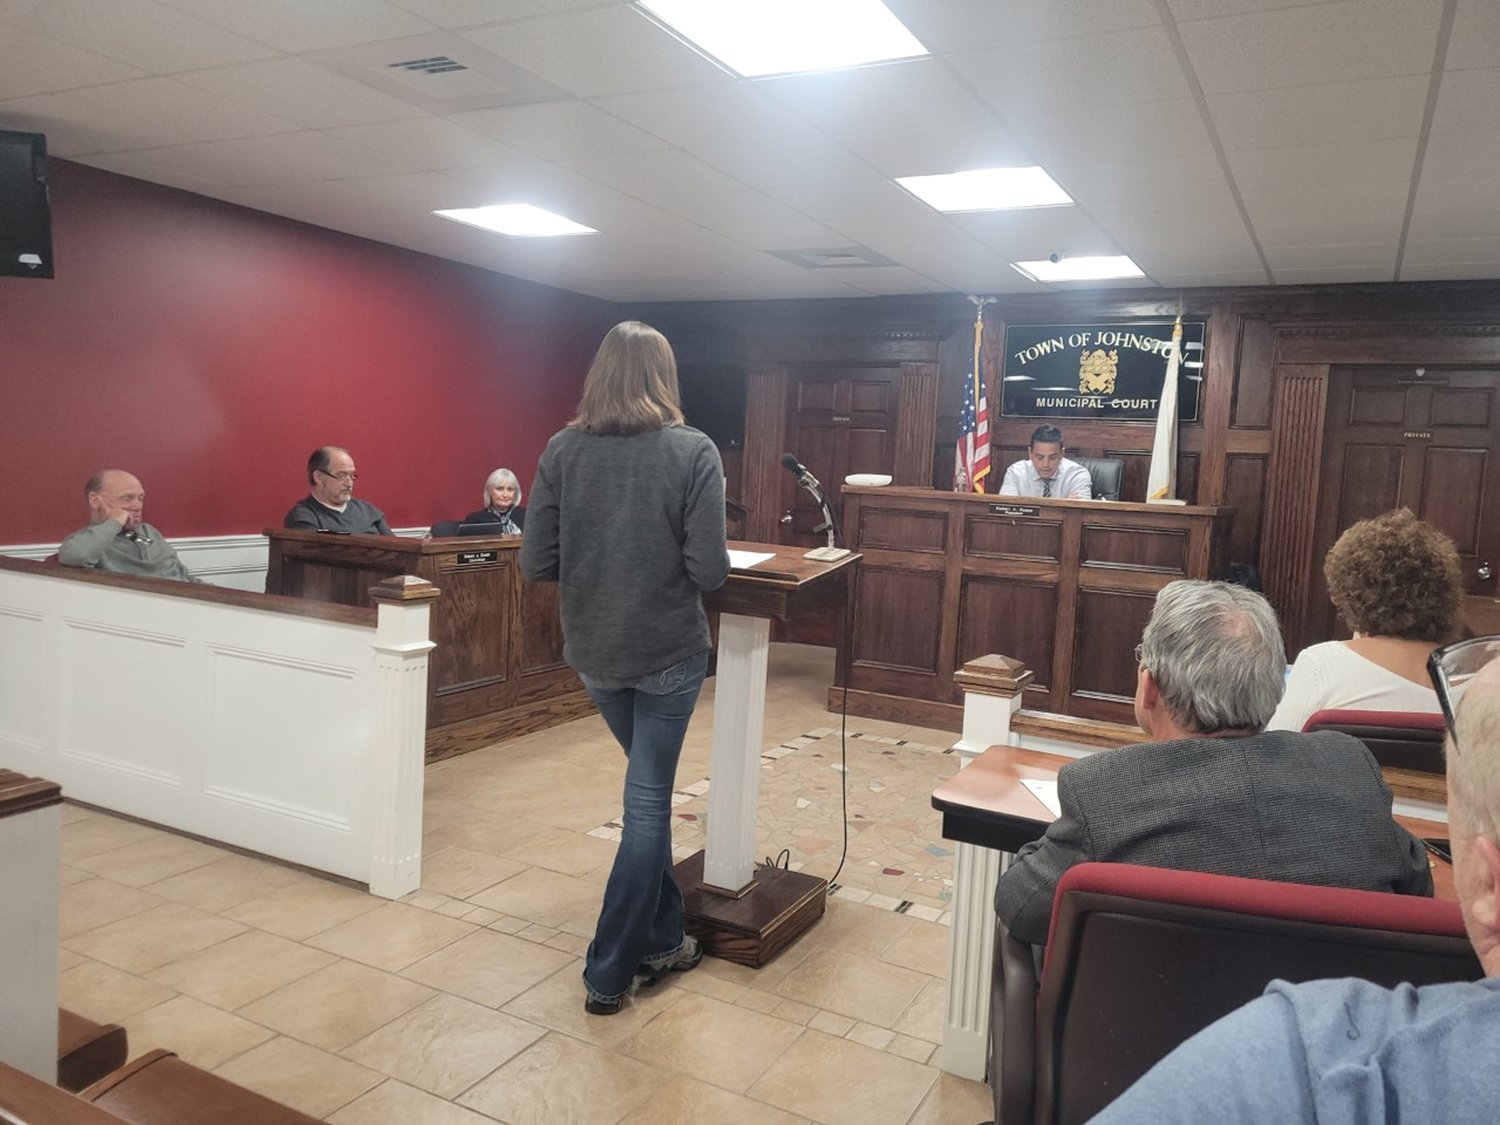 TOWN COUNCIL PLEAS: Bonnie Dibble, shown here, and her husband, Chris Dibble, both addressed Johnston Town Council, asking for a pause in new solar project development in town. A large solar field has been proposed for a plot of woodland abutting their property.